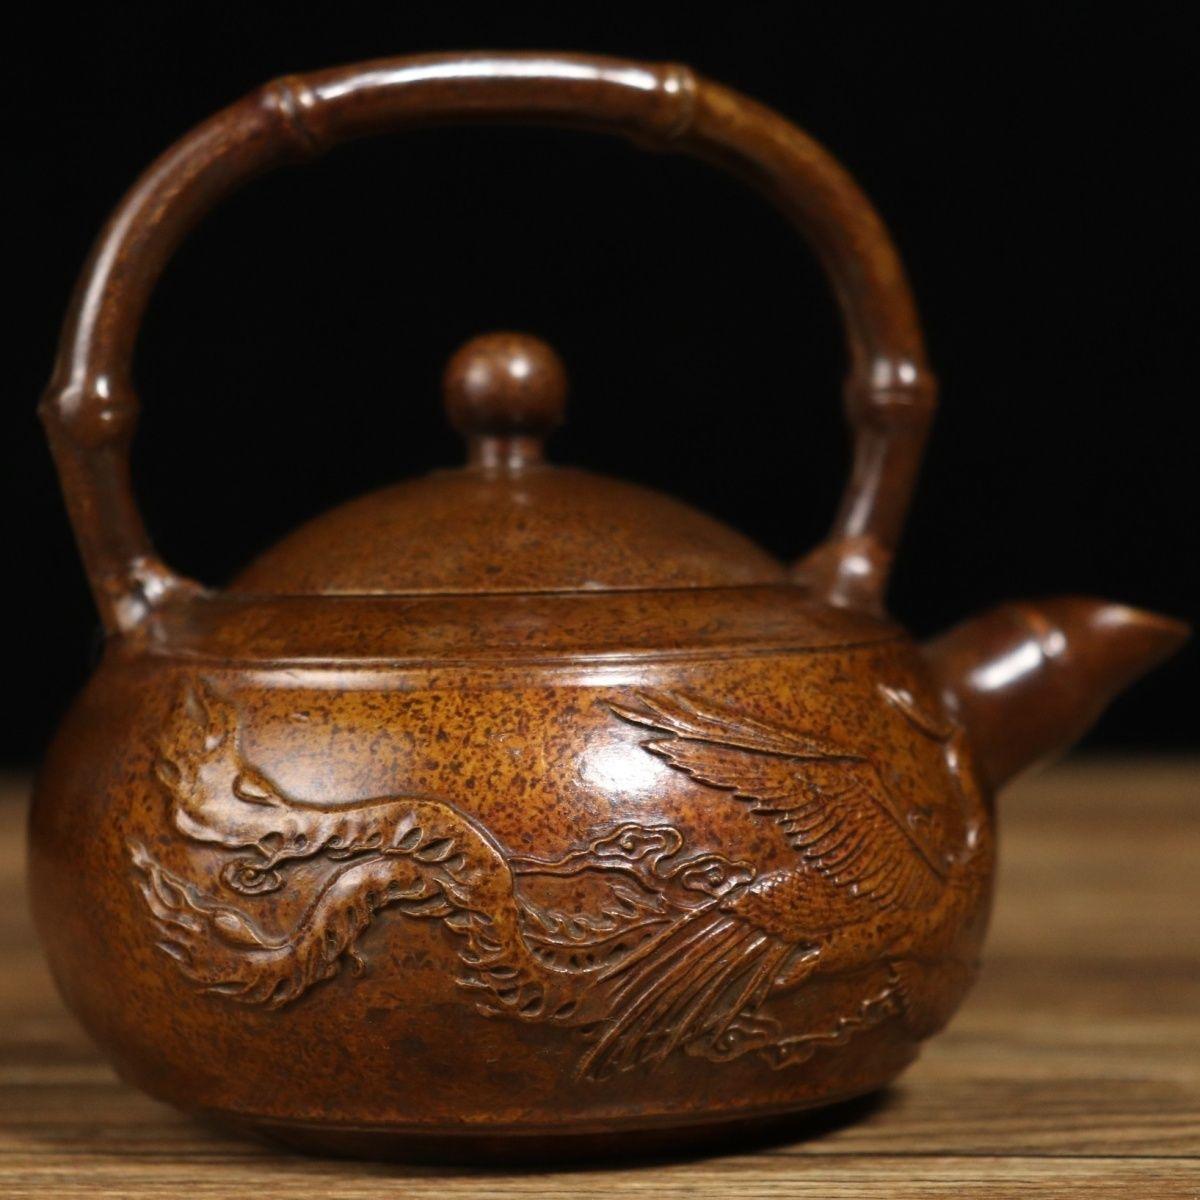 Old collection of this Chinese Bronze Teapot with Dragon and Phoenix, the mark on the bottom Qian Long Nian Zhi means it was made in Qing dynasty Qian Long period, unique style and exquisitely carved, good for decoration and